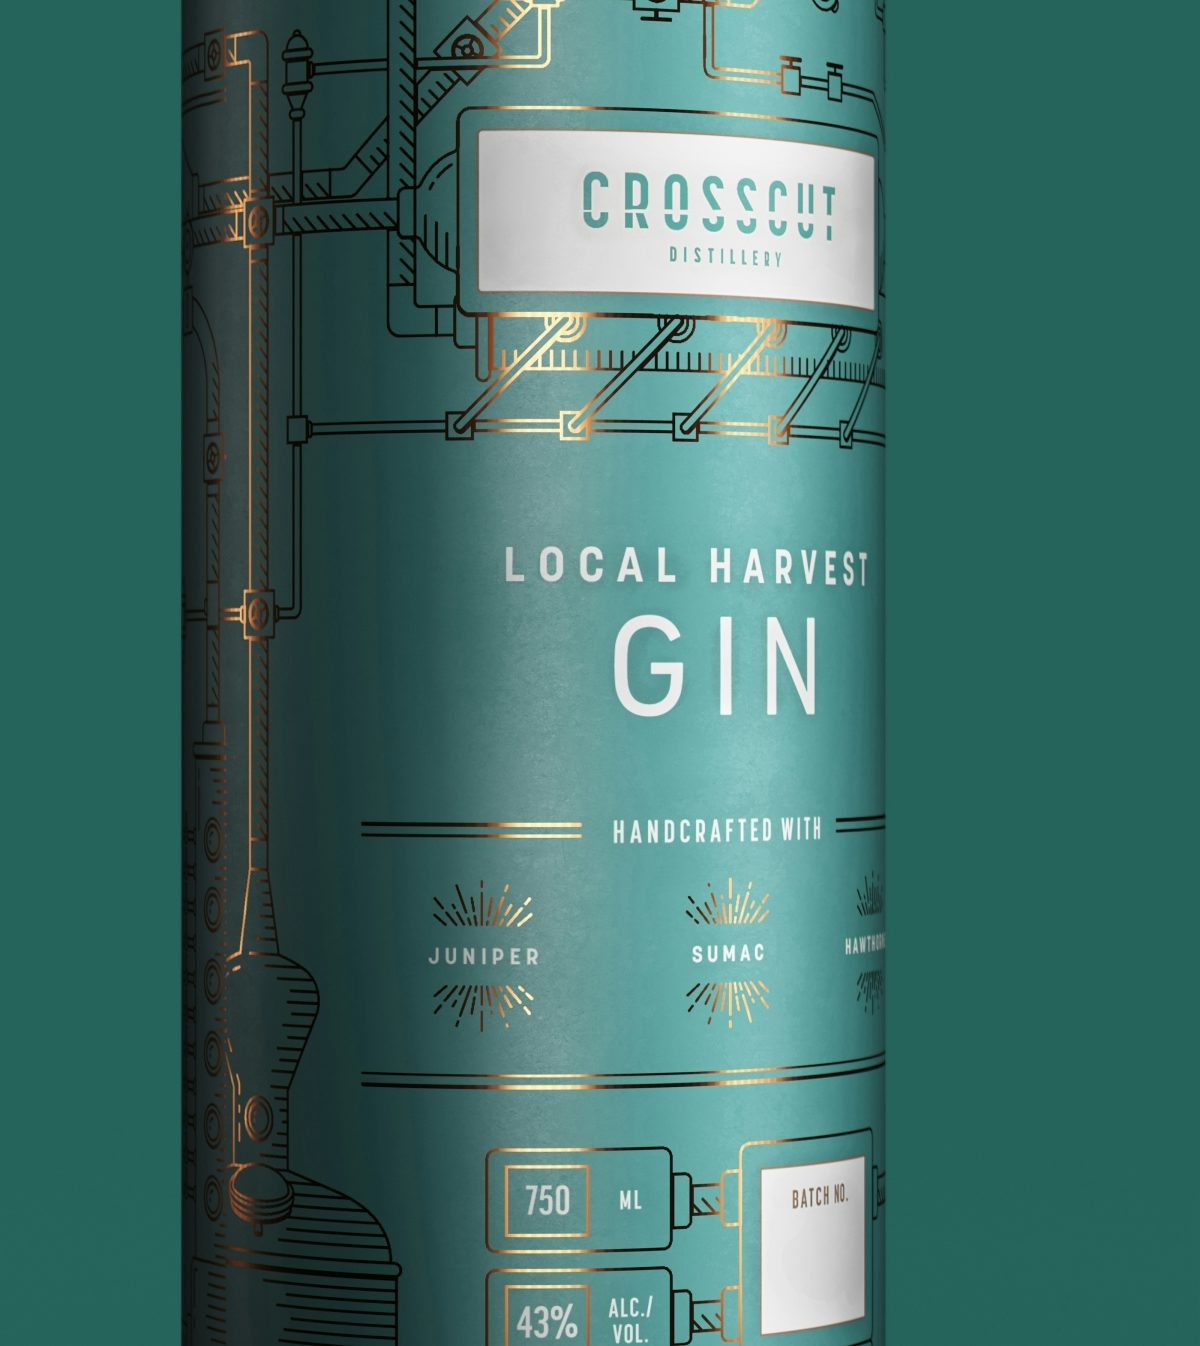 Turquoise Local Harvest Gin label from Crosscut Distillery rotating with light shimmering off the label, exposing reflective ink details